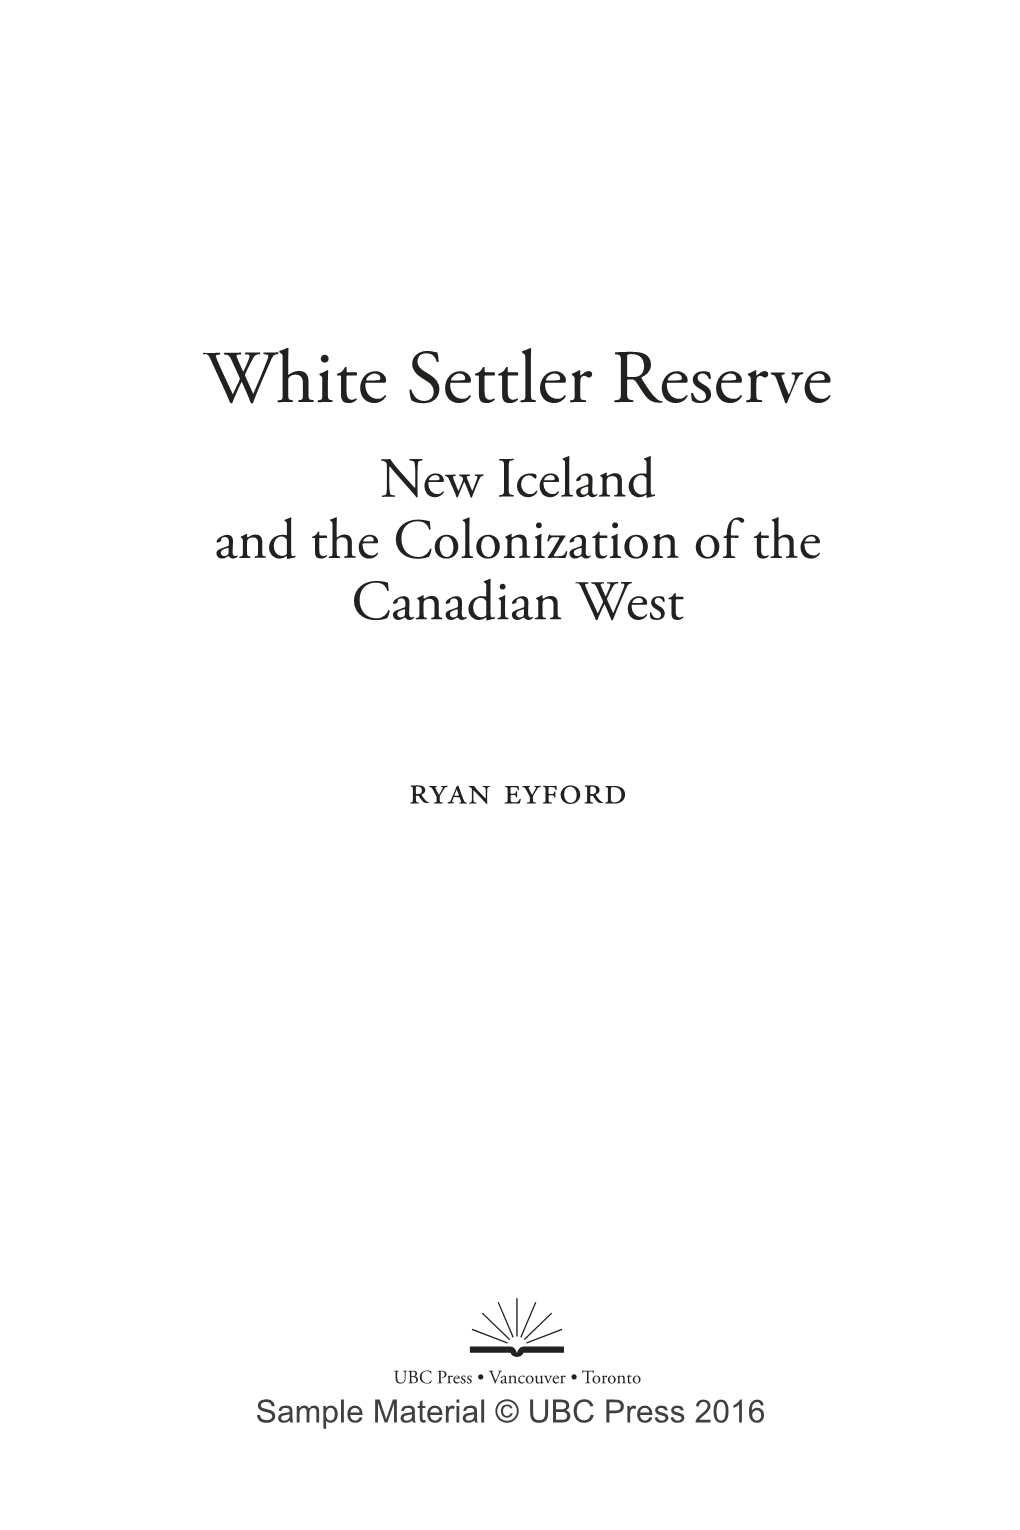 White Settler Reserve New Iceland and the Colonization of the Canadian West